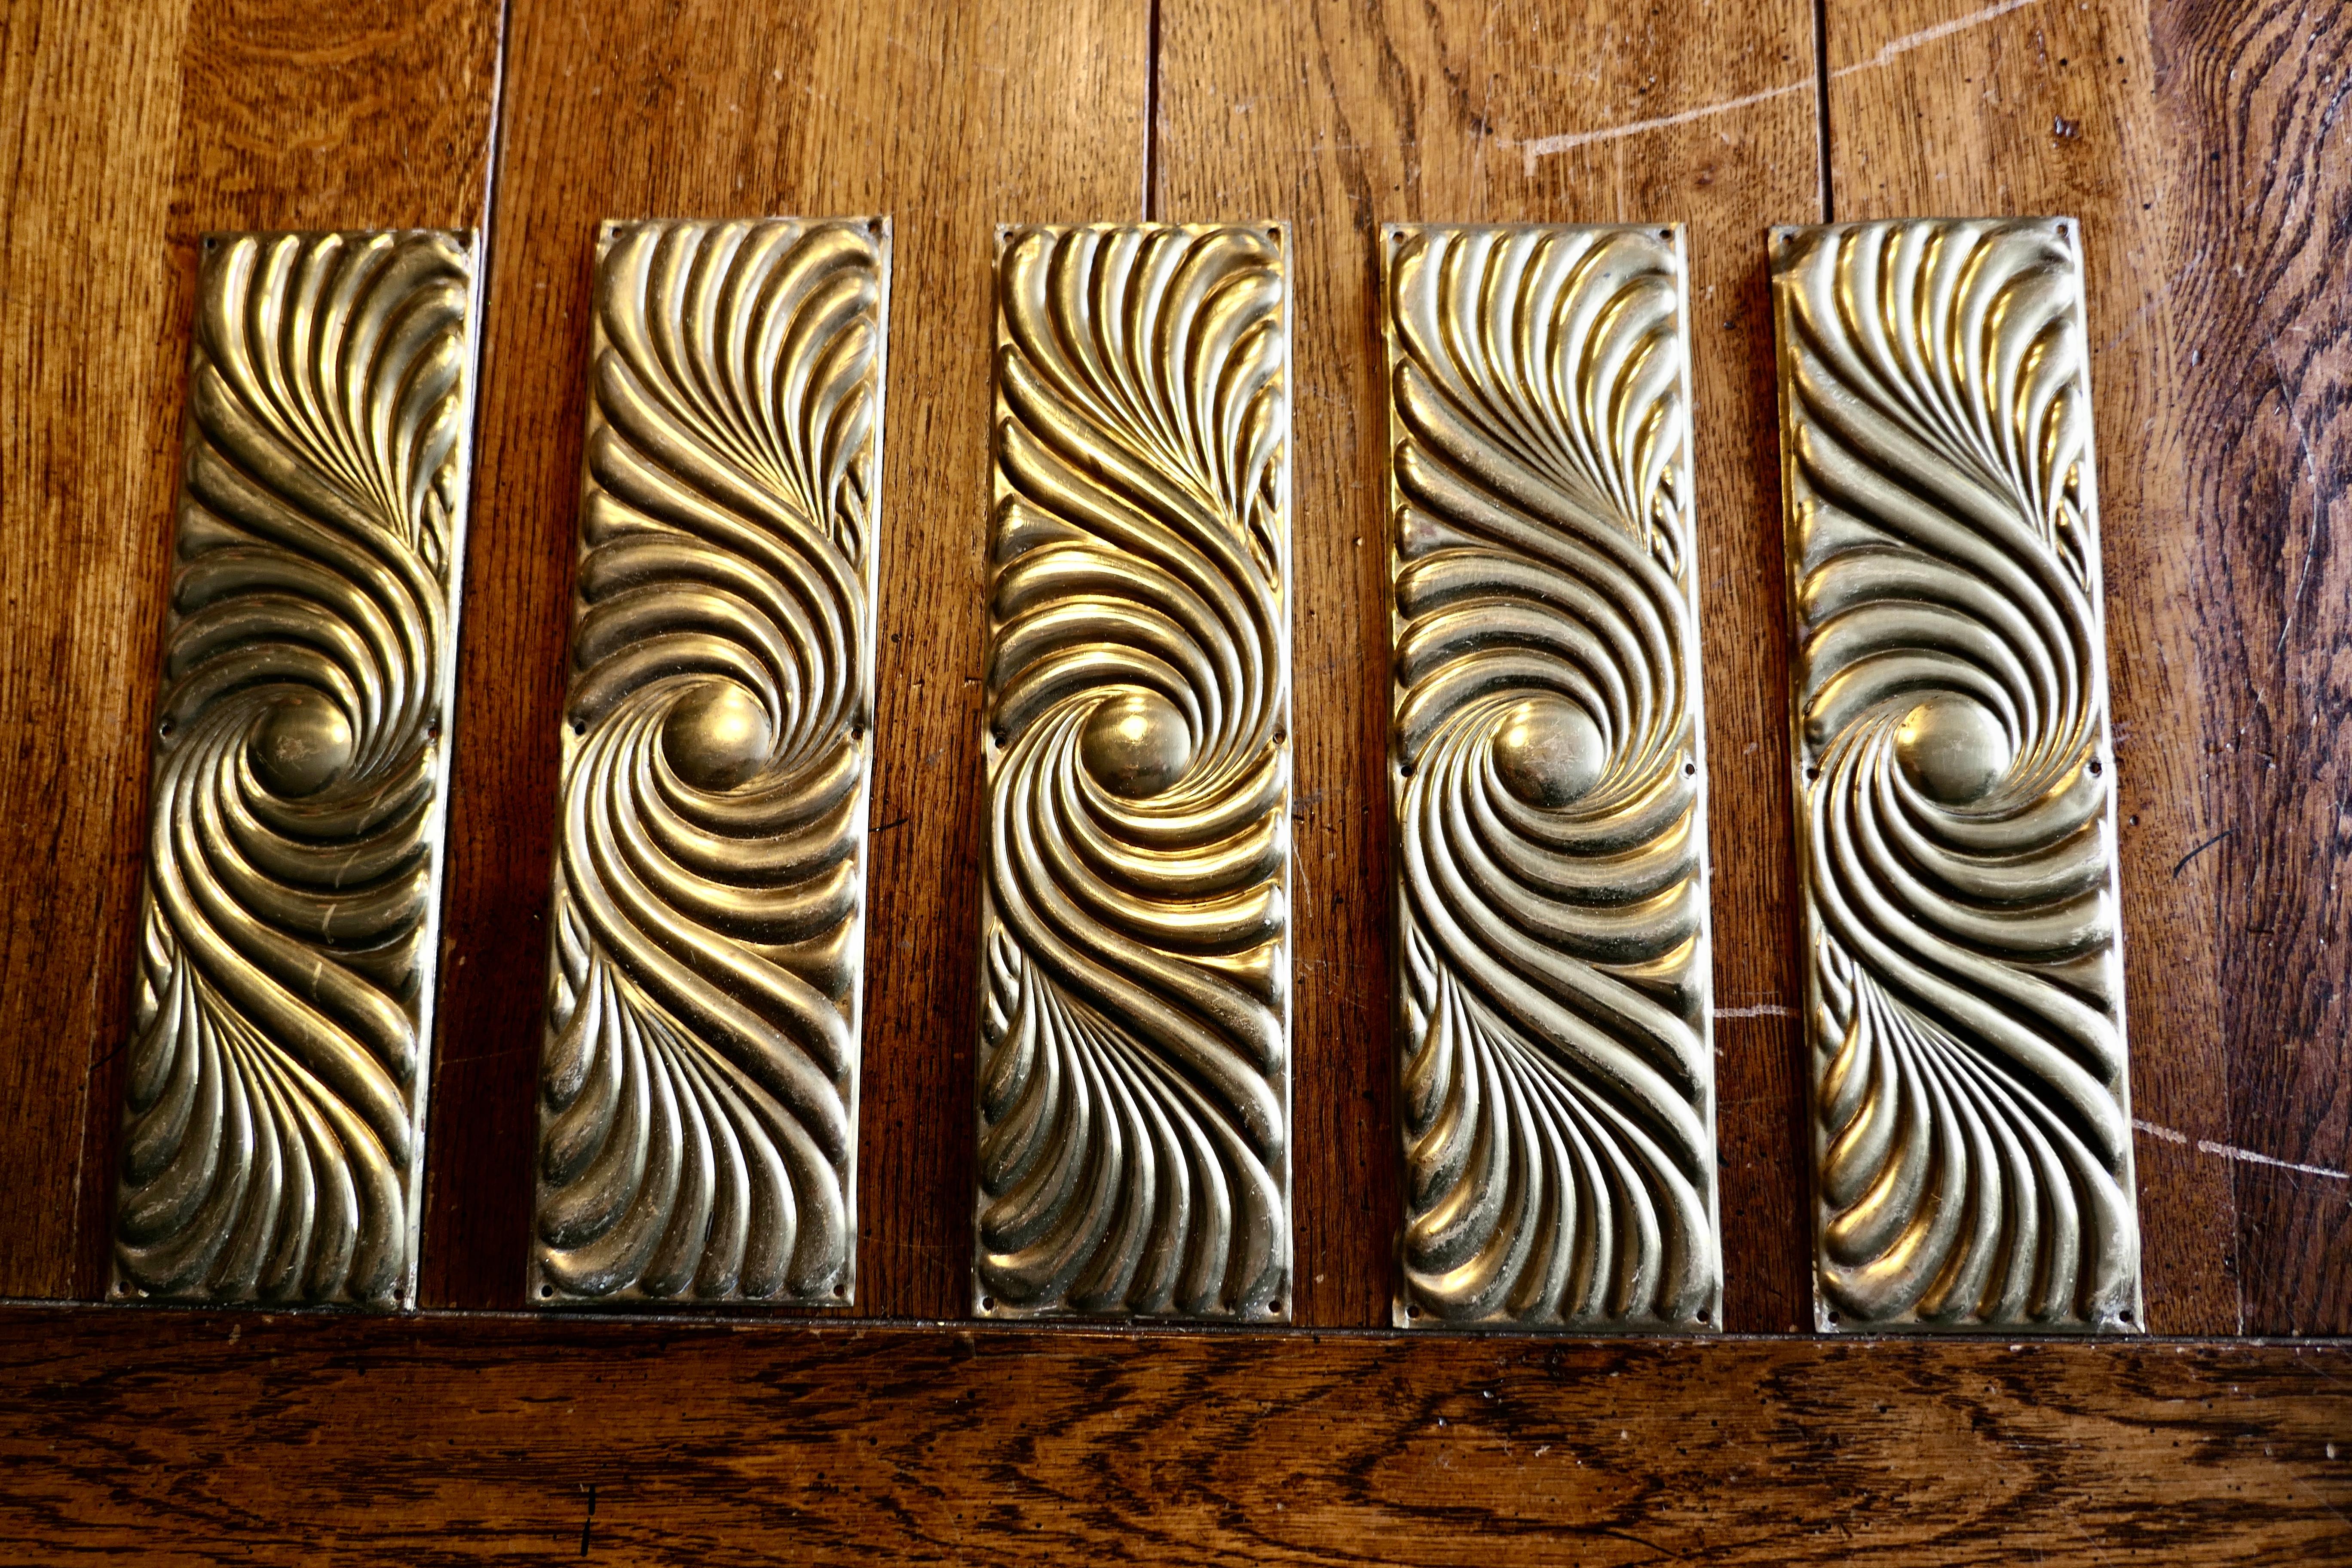 A Large Set of 5 Art Deco Brass Door-furniture Finger Plates 

There are 5 identical plates in the set, they are made in pressed brass and have a double swirl pattern
The plates are in good used condition and they have small screw fixing holes, the